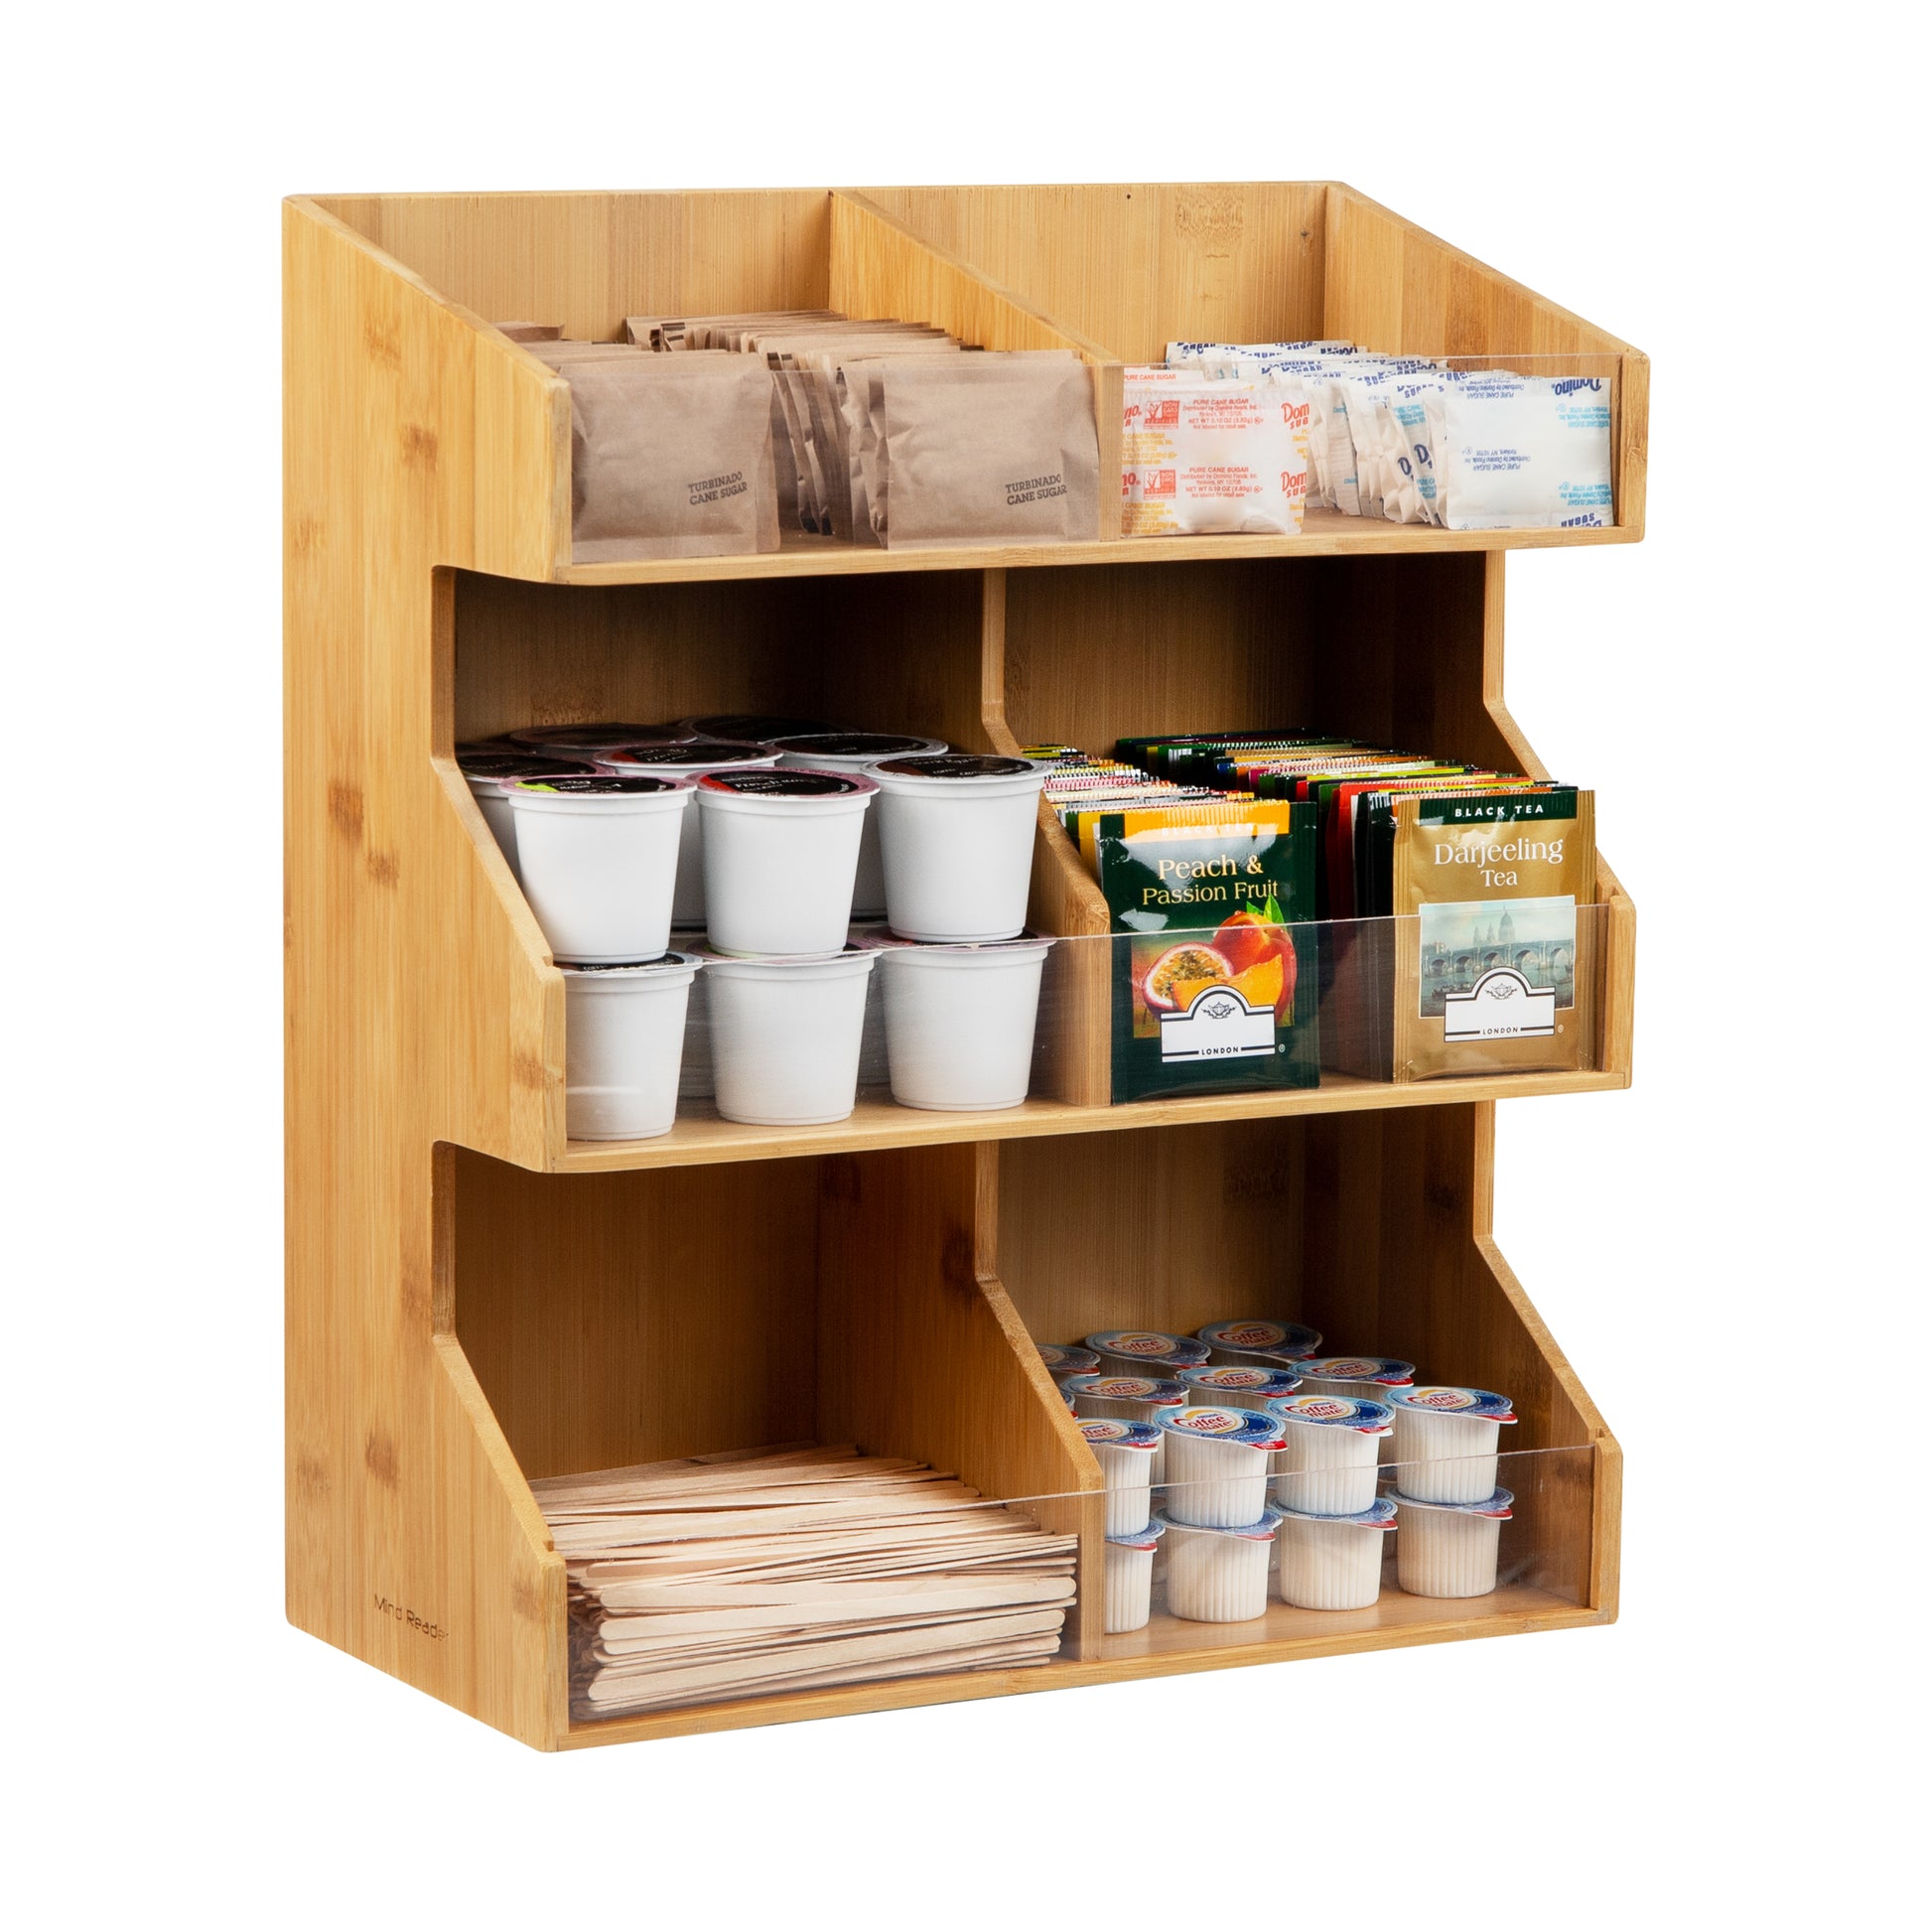 Our Kitchen Tea Station and Tiered Trays for Kitchen Storage